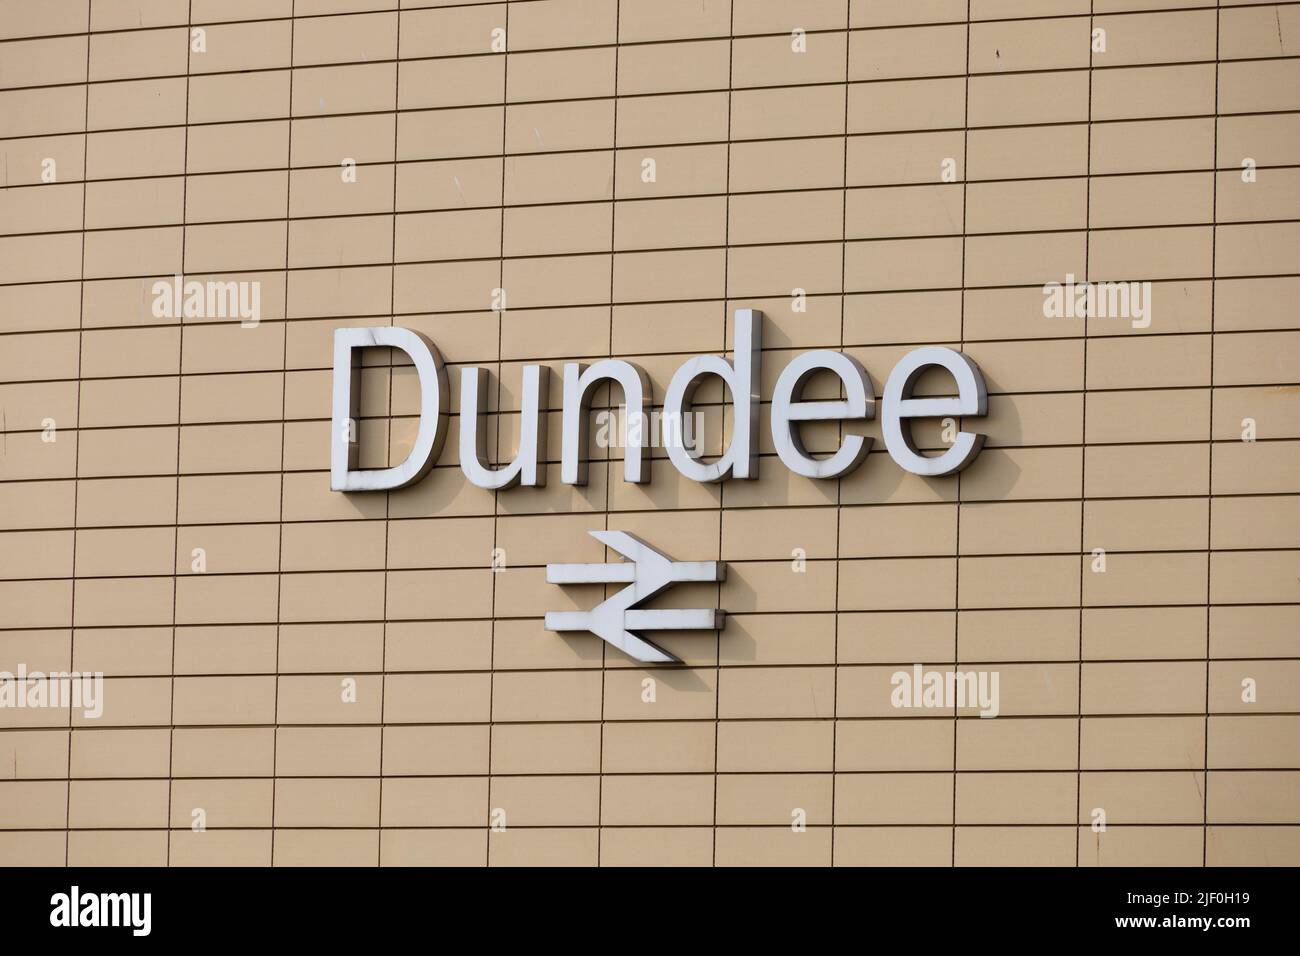 Gare de Dundee. Dundee, Angus, Écosse Banque D'Images